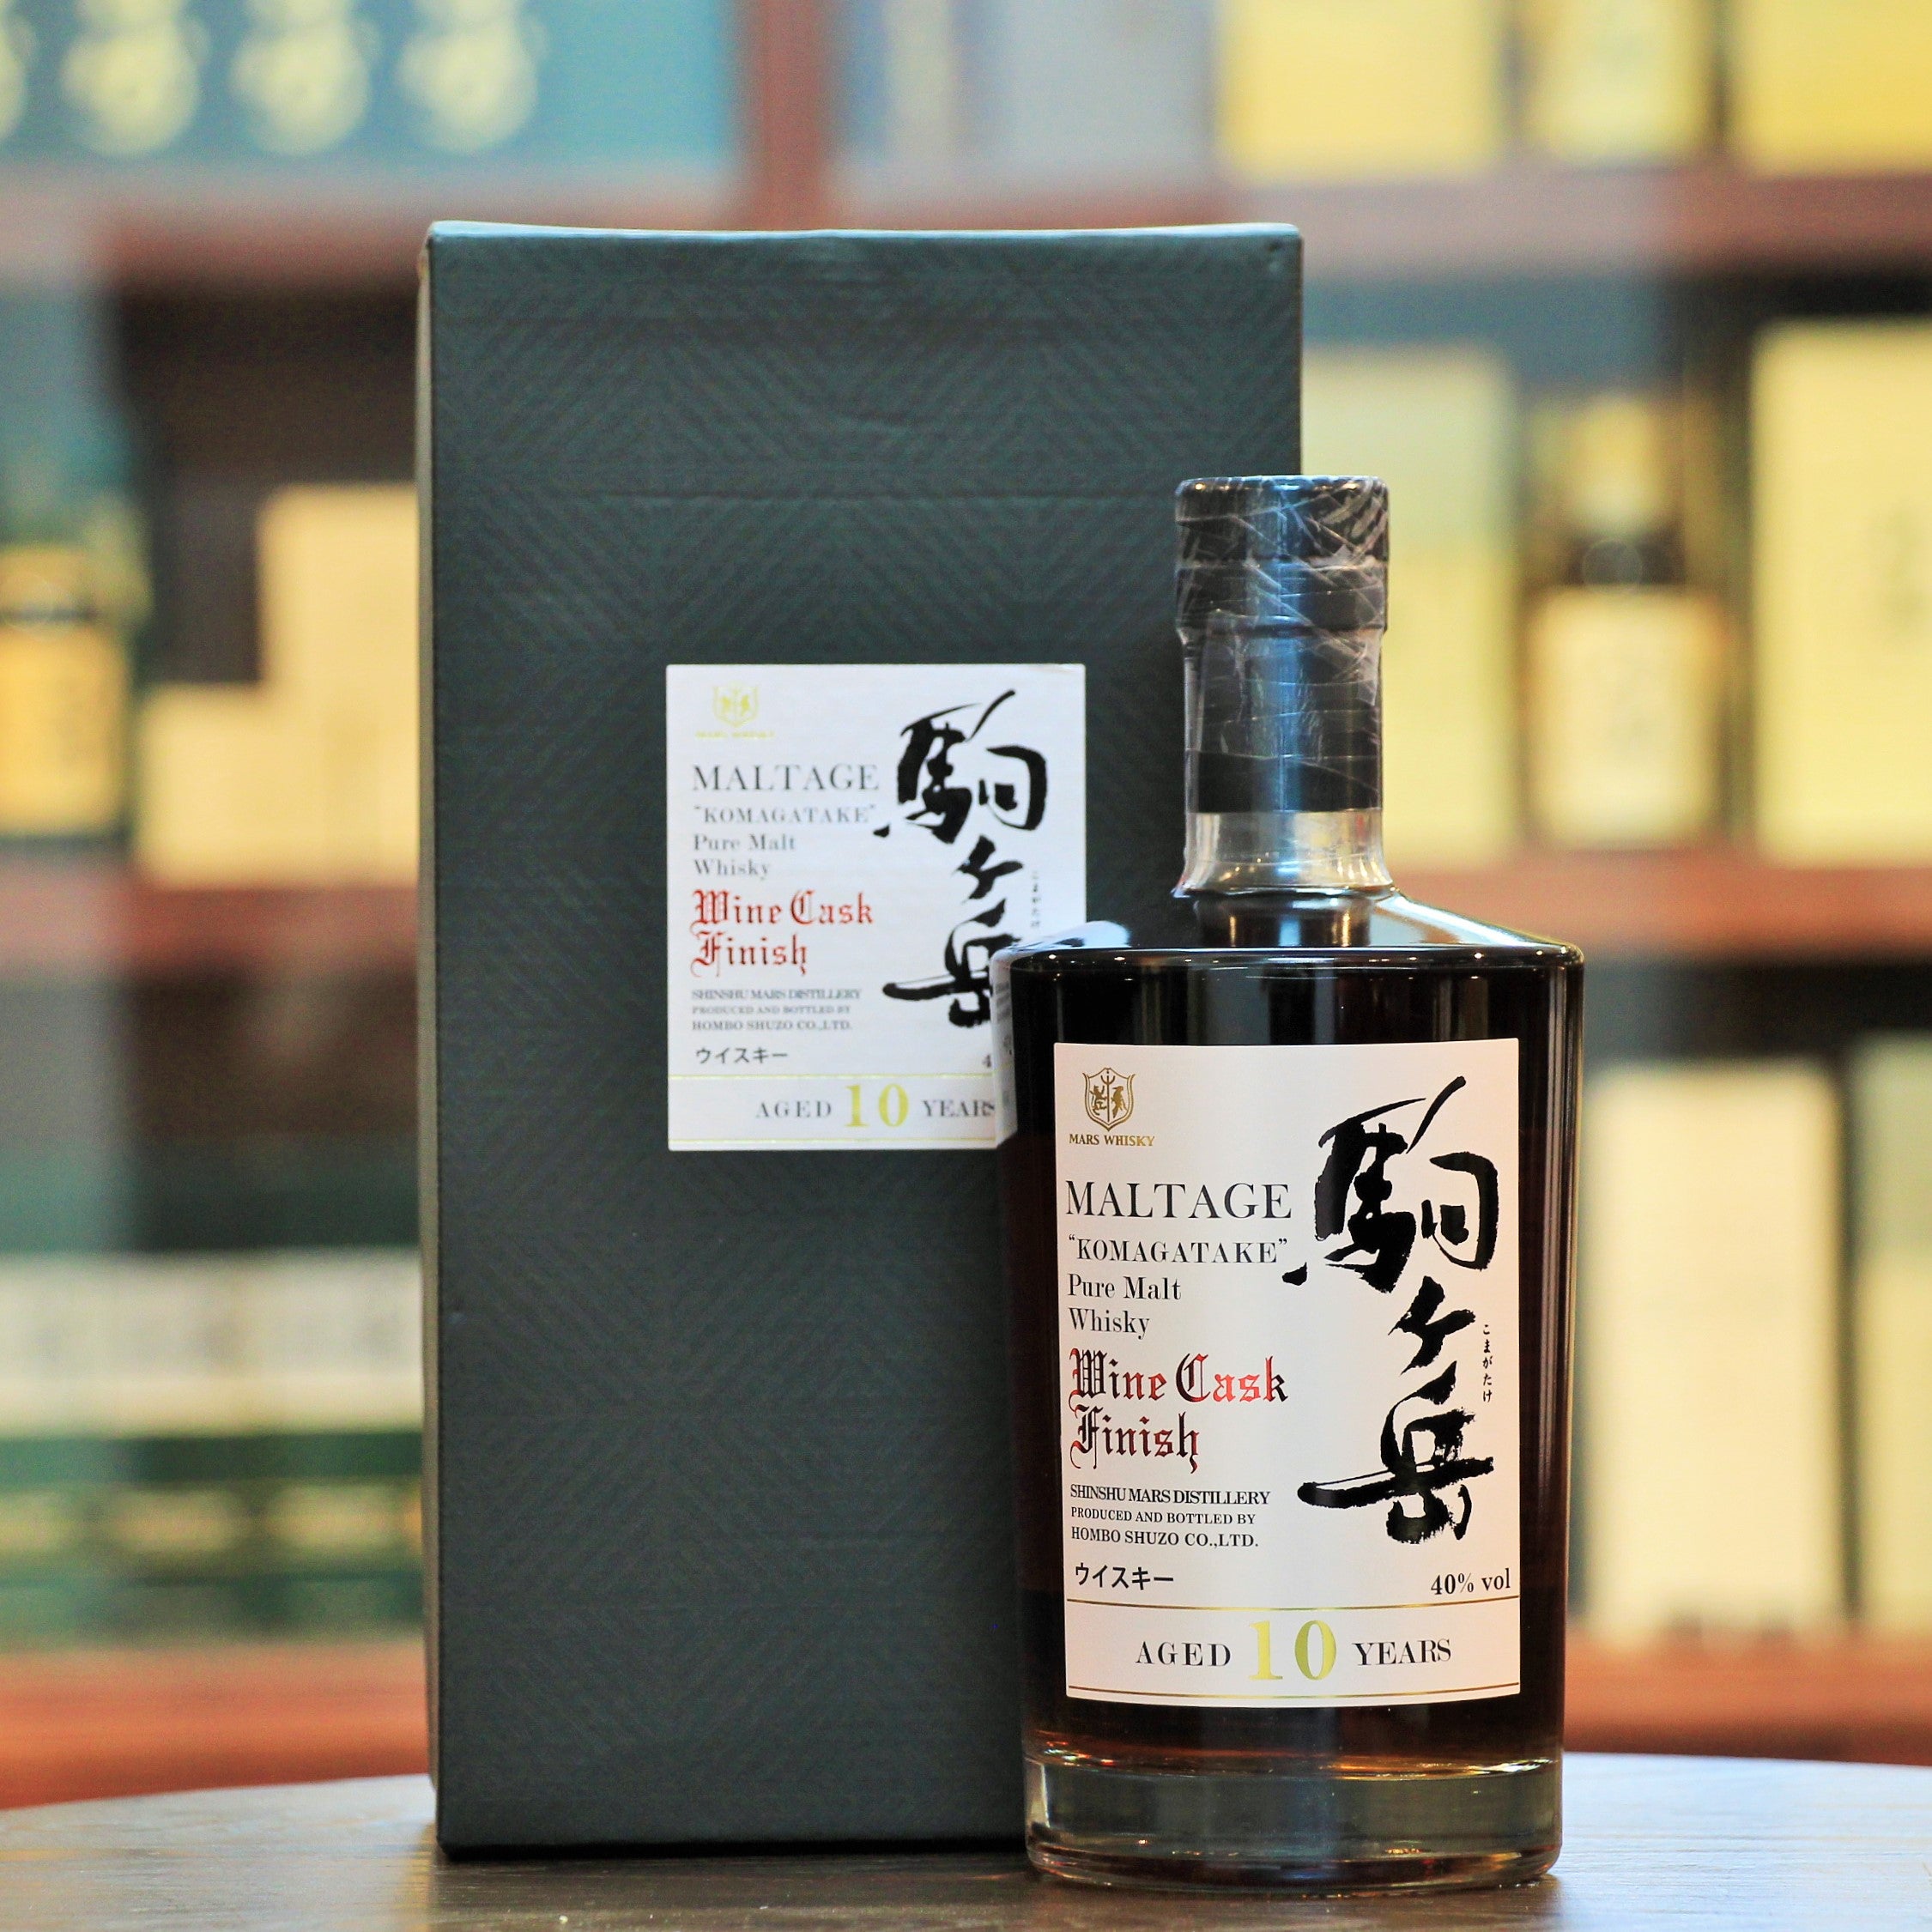 Mars Komagatake 10 Years Old Wine Cask Finish, A discontinued "old dumpy" bottling of Komagatake Single Malt 10 years, which has been finished in Wine Casks.